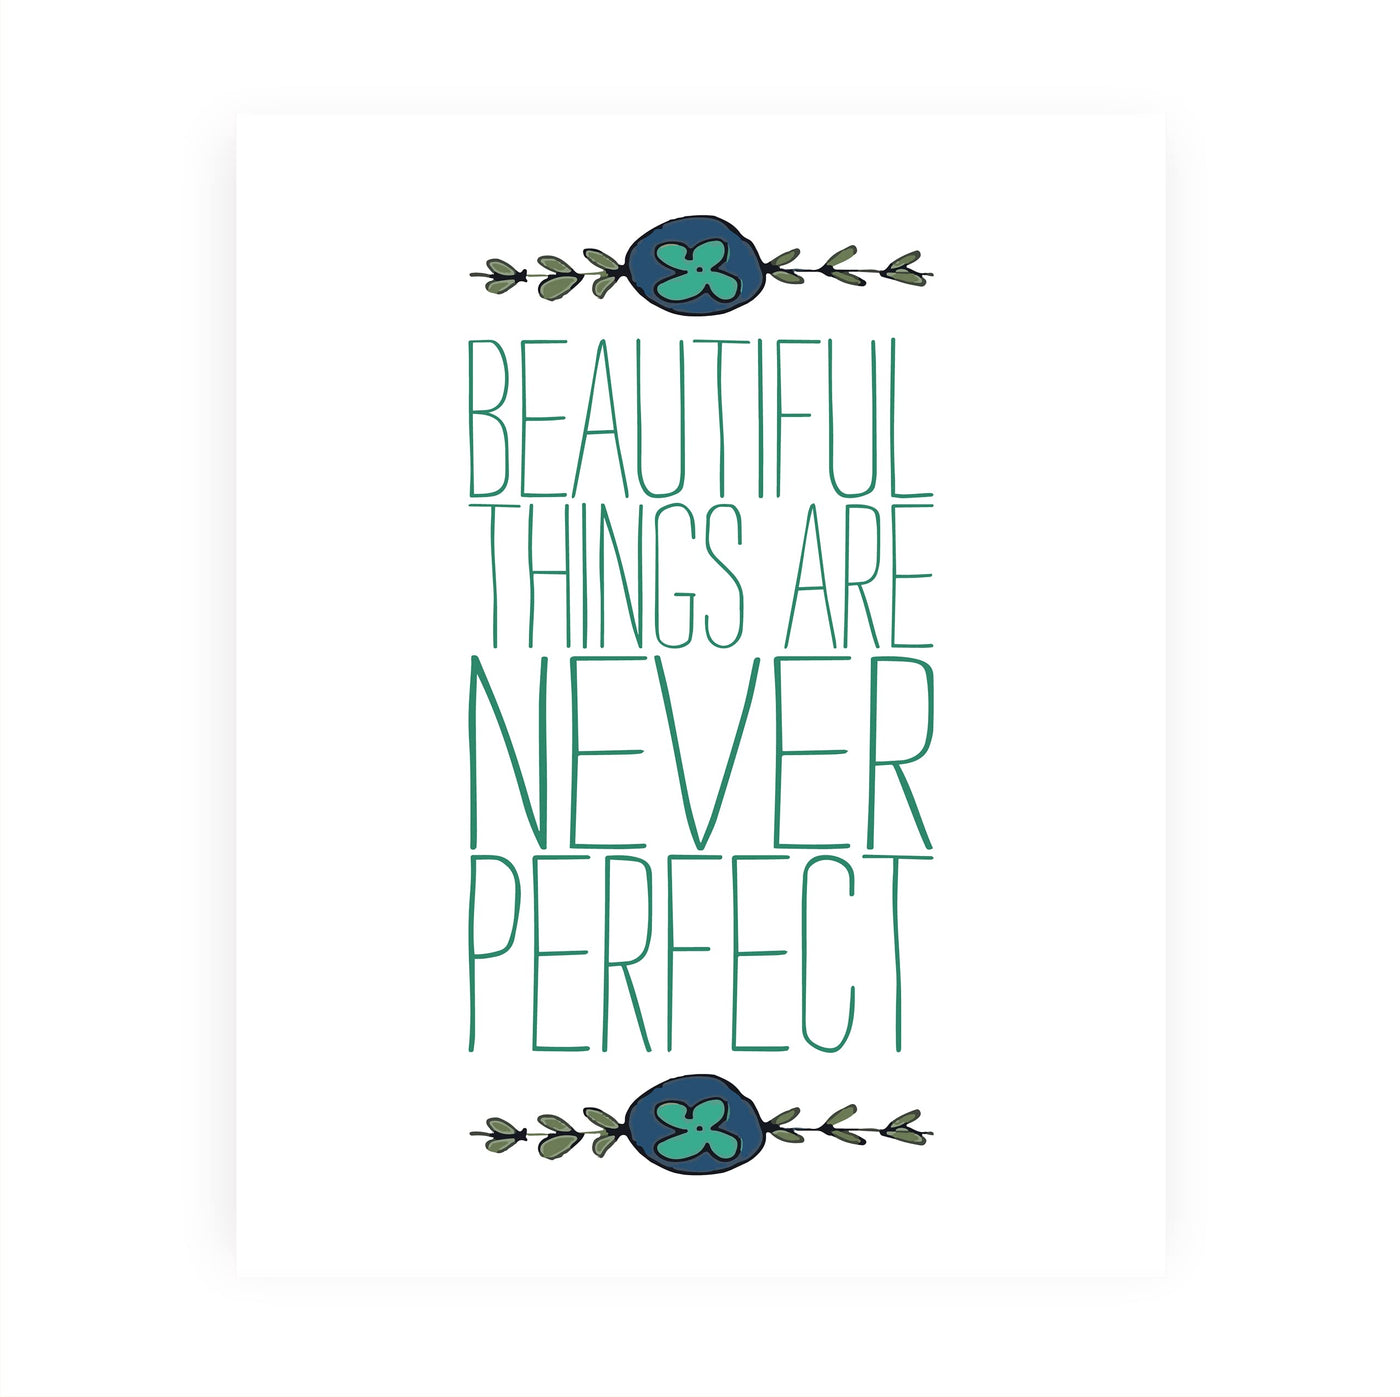 Beautiful Things Are Never Perfect- Inspirational Quotes Wall Art -8 x 10" Modern Typographic Floral Print -Ready to Frame. Motivational Home-Office-Studio-School-Teens Decor. Great Life Lesson!